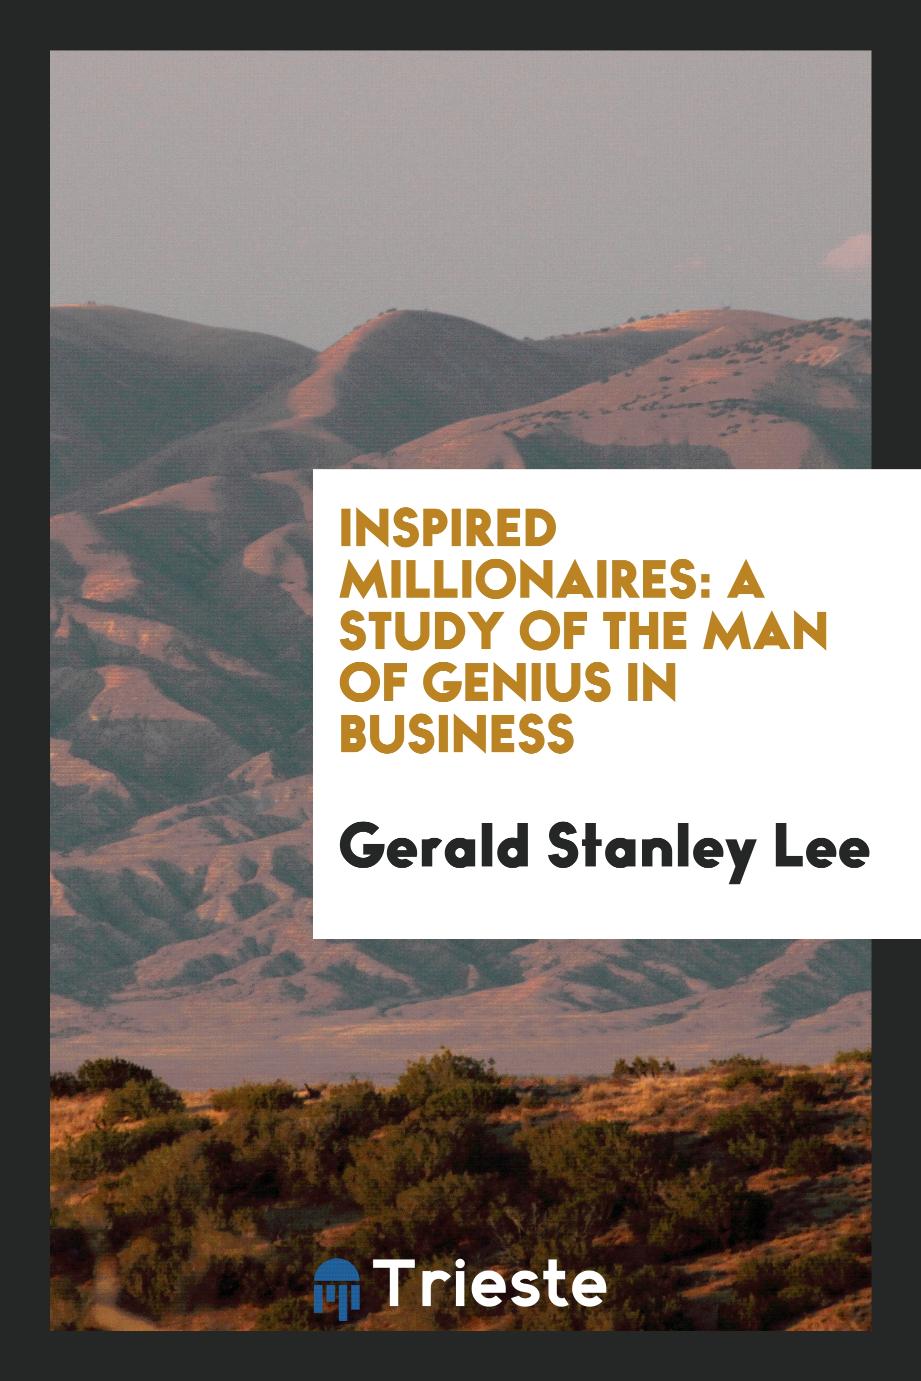 Inspired millionaires: a study of the man of genius in business